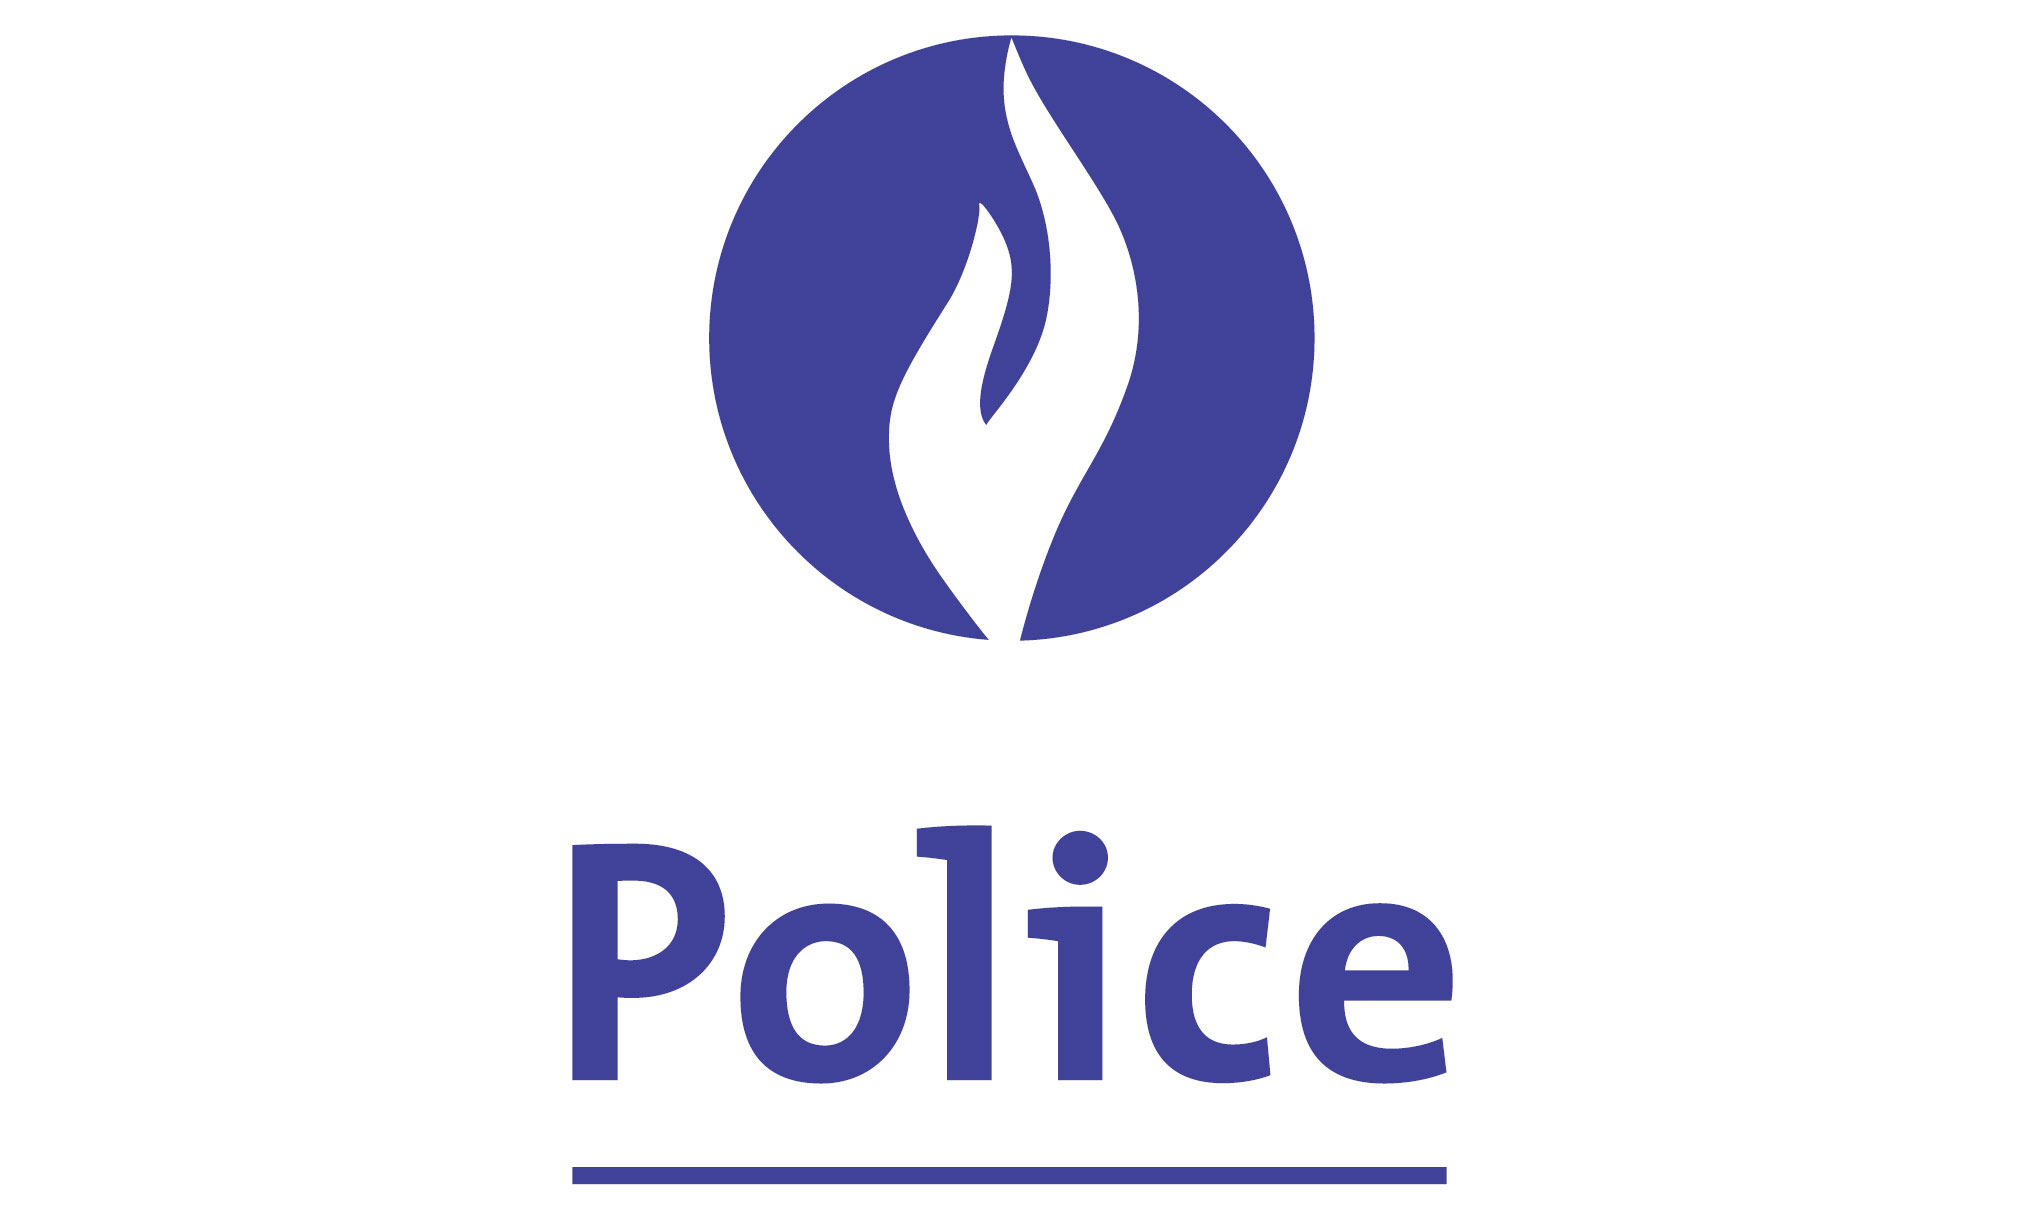 www.police.be